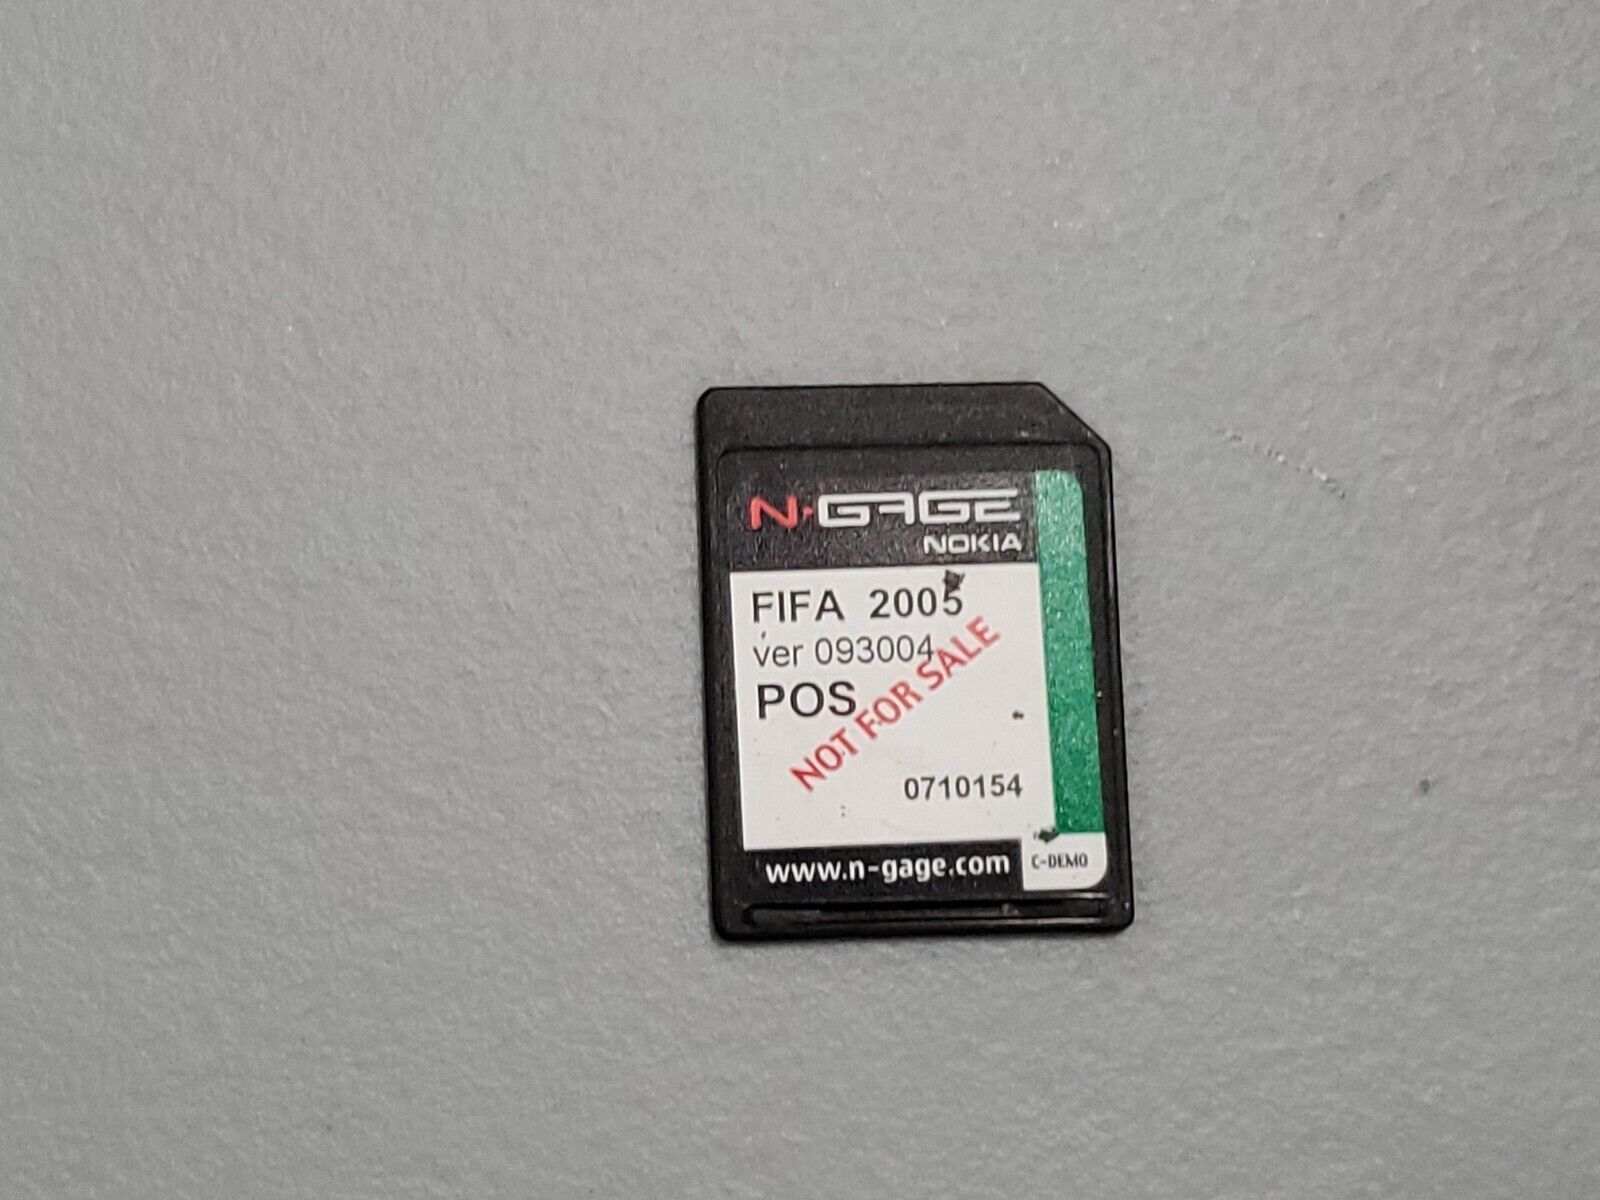 Primary image for Nokia N-Gage FIFA 2005 Soccer NFS Promotional Game